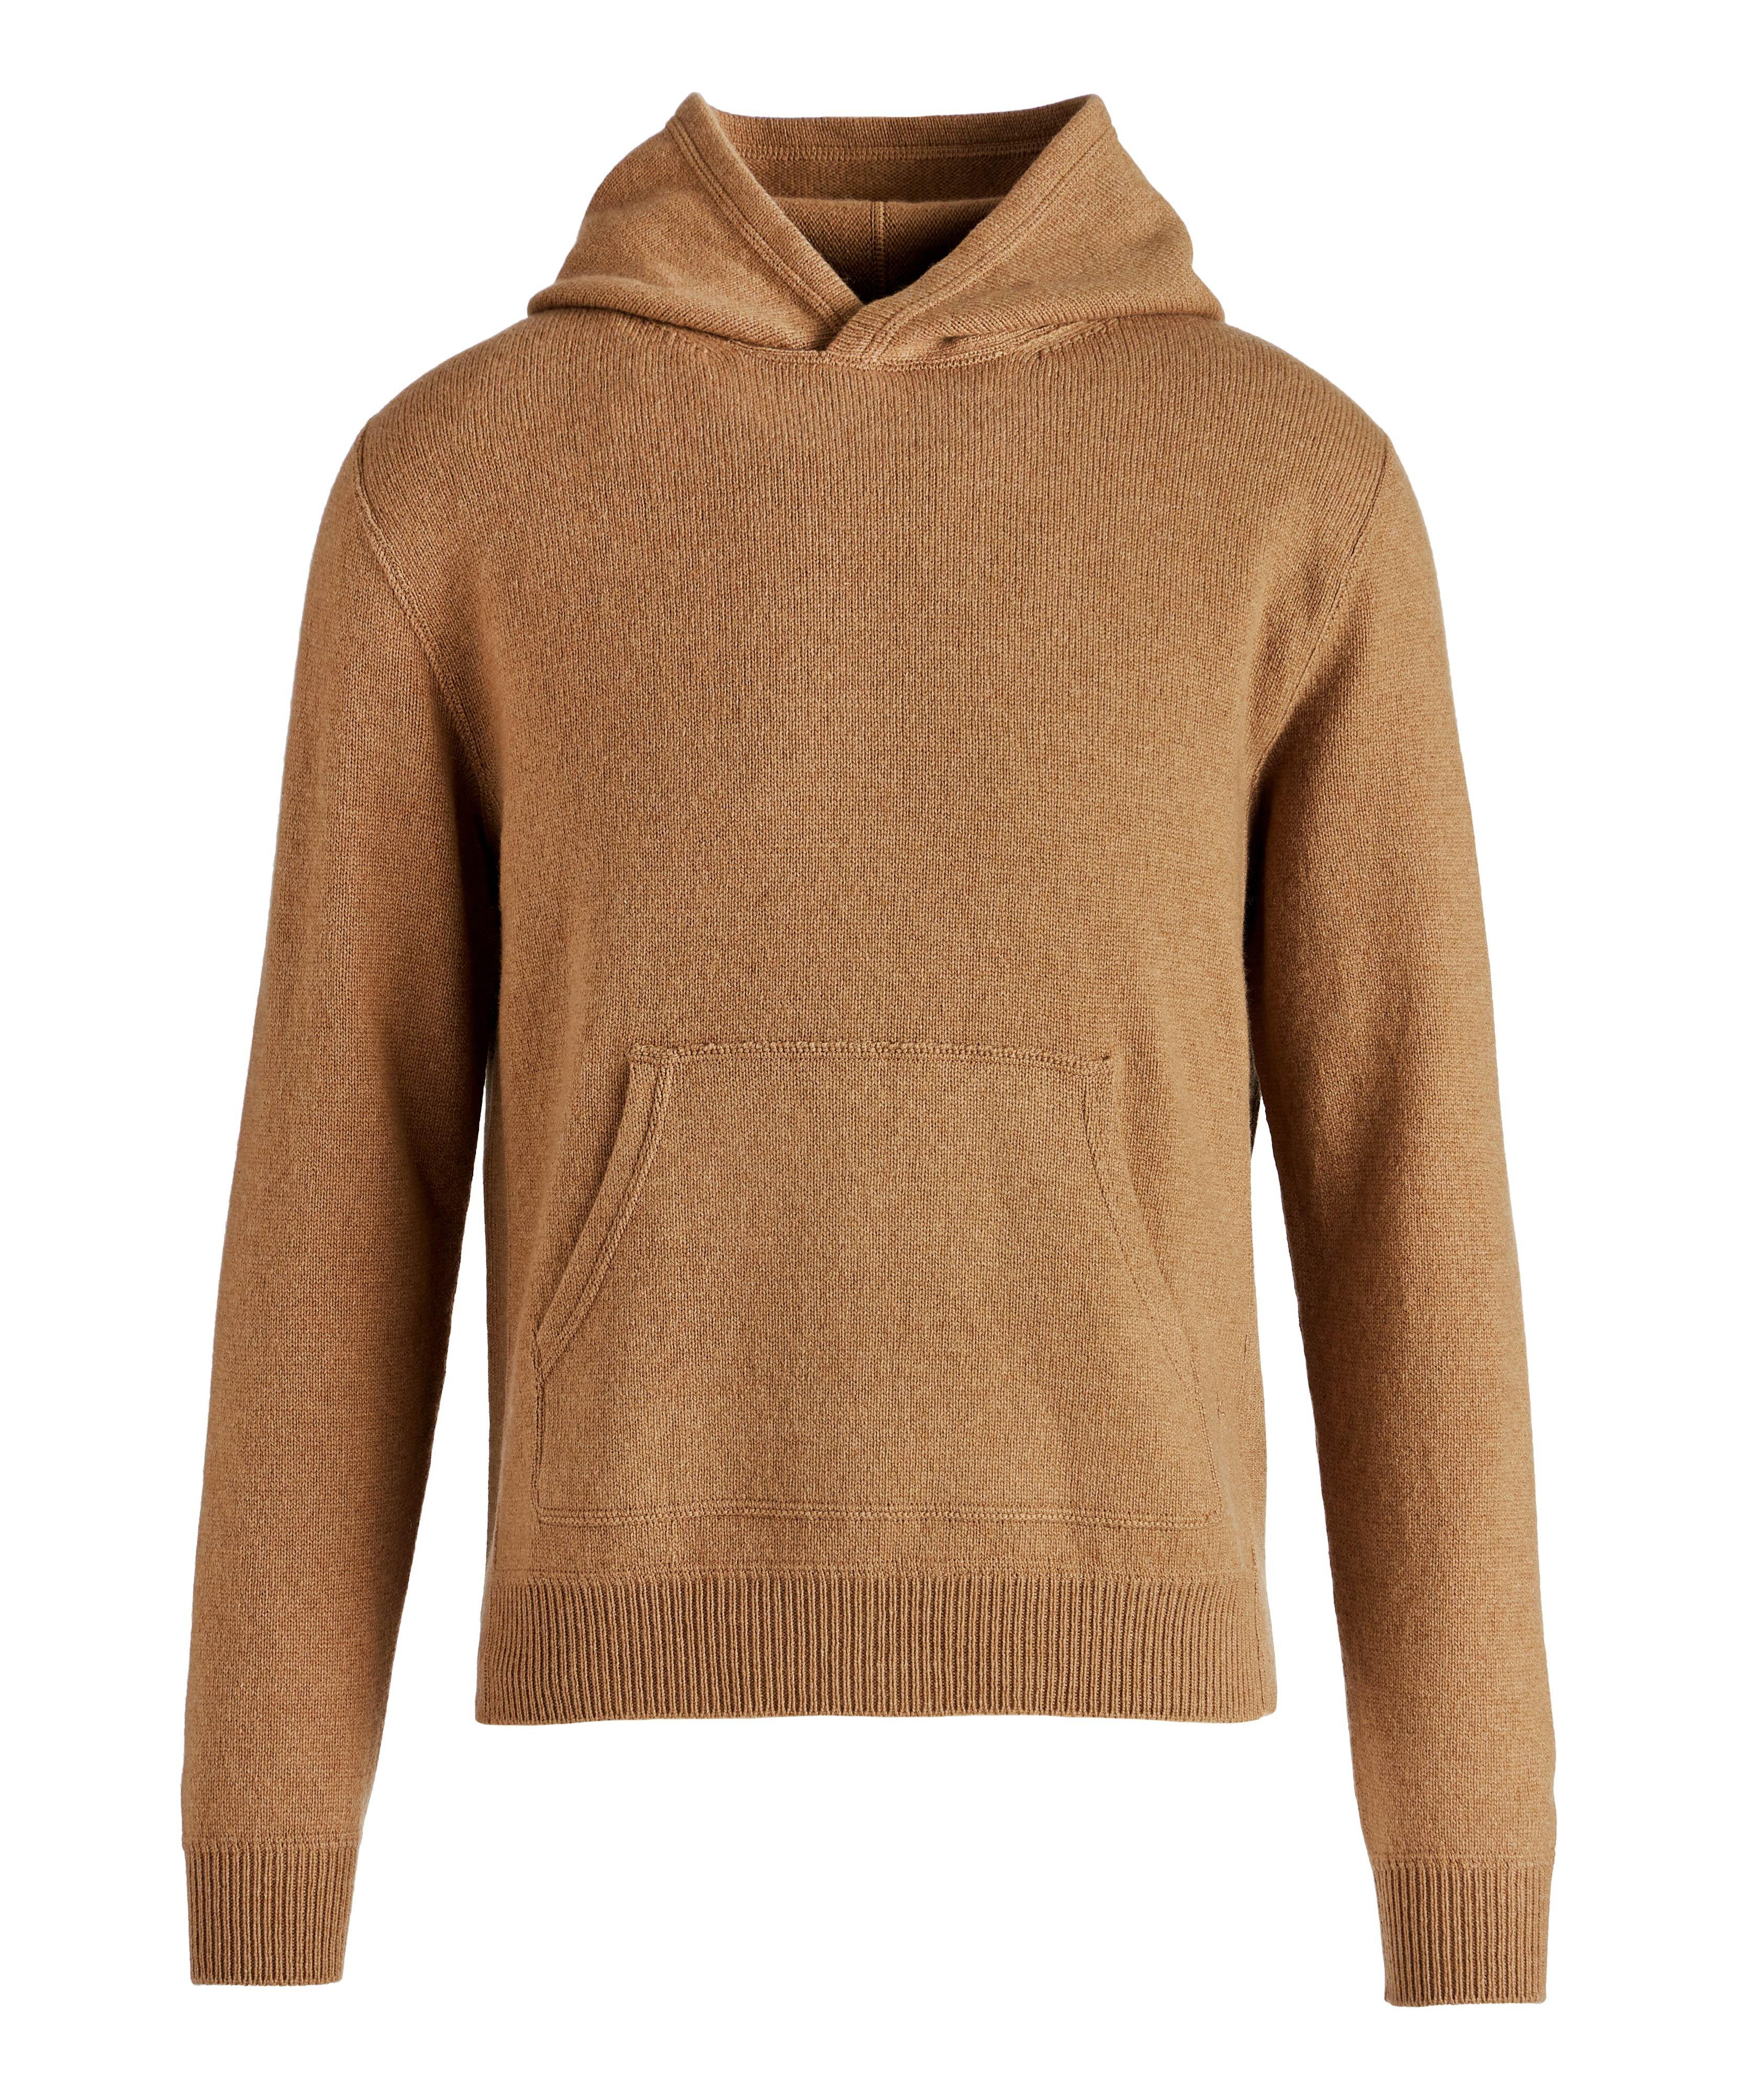 Cashmere Knit Hoodie image 0